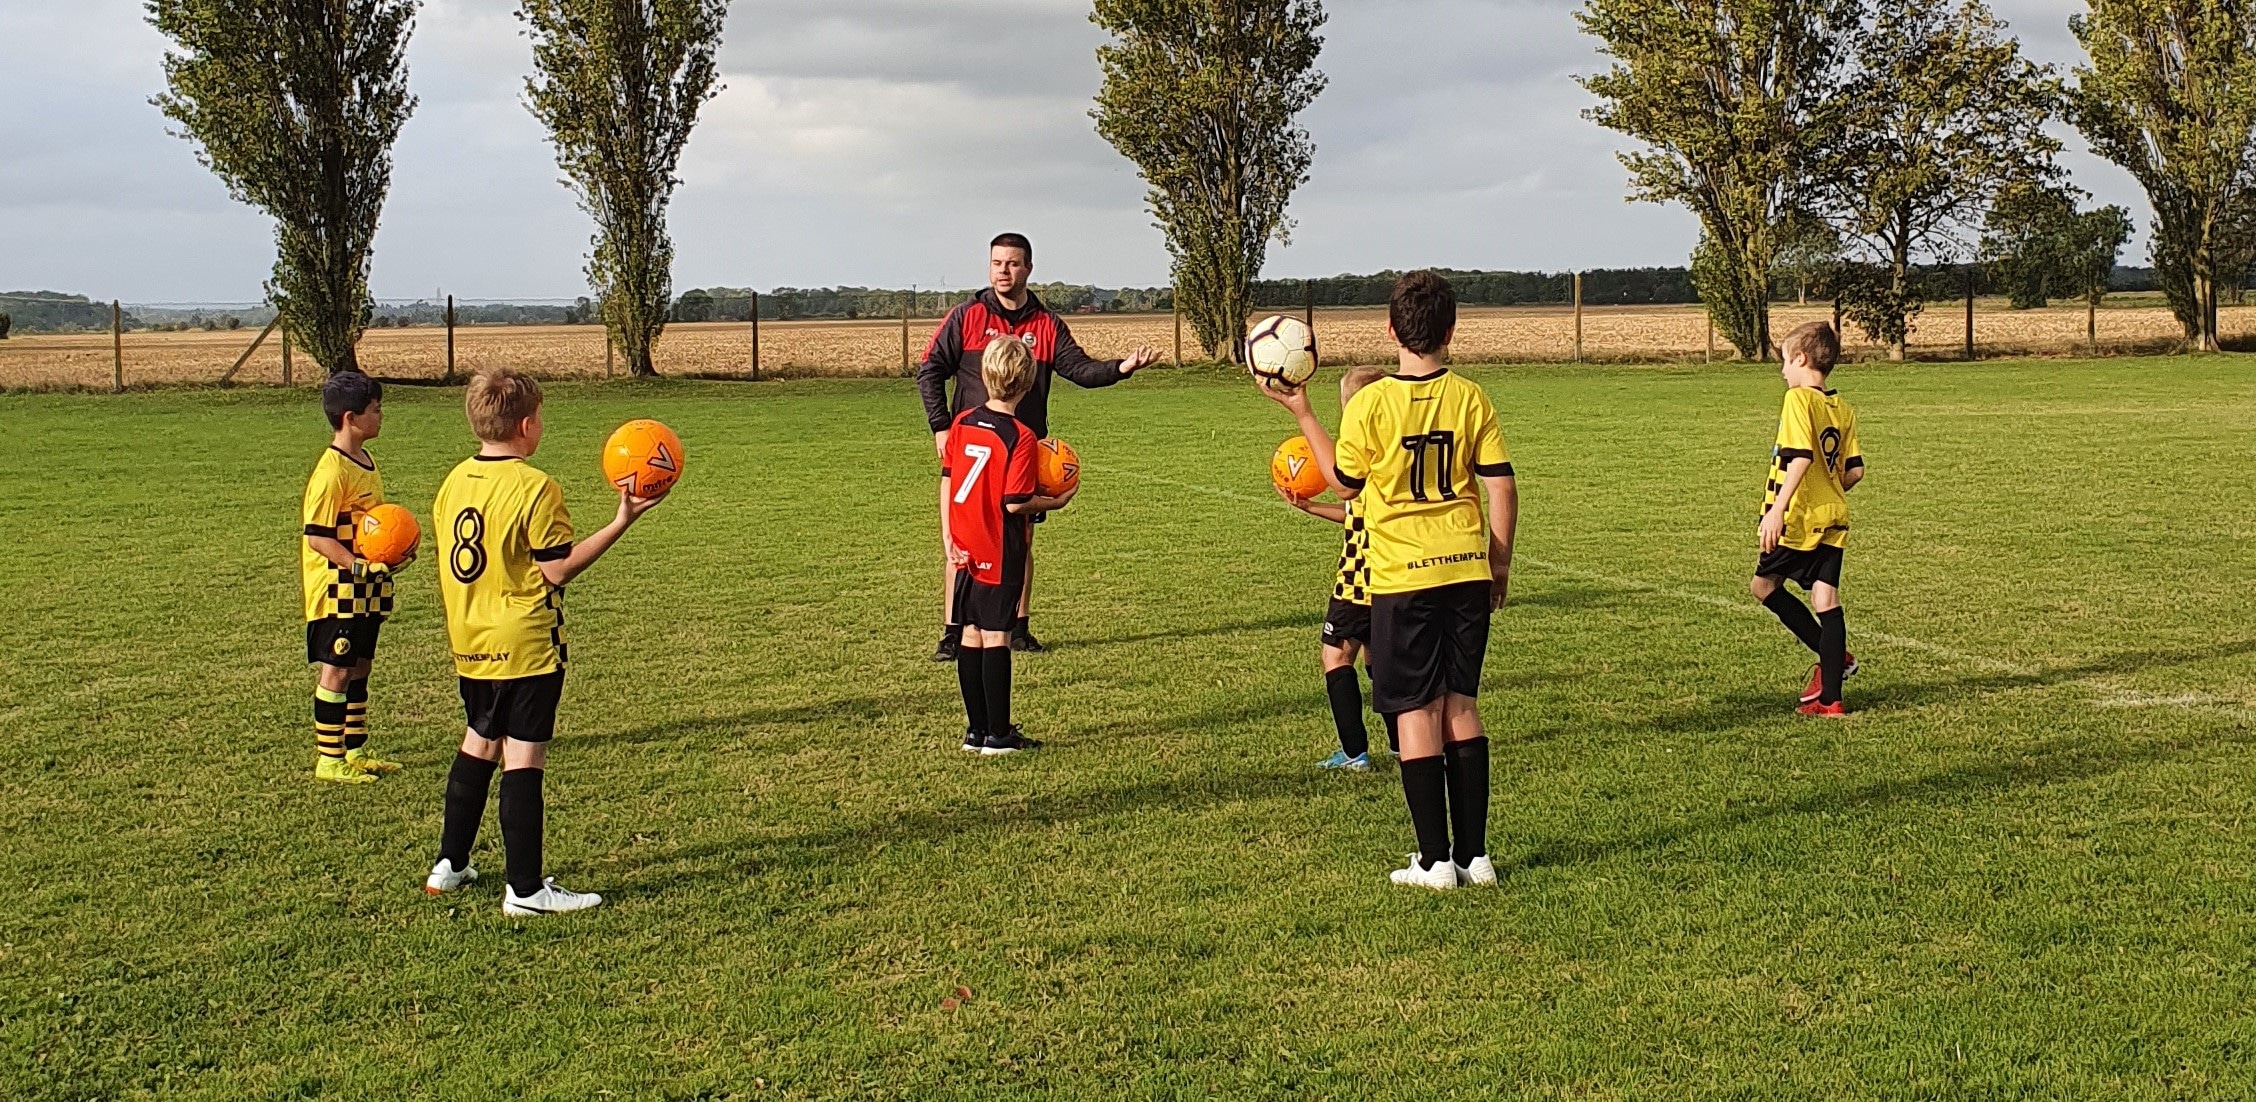 Paul cooper training youngsters at football